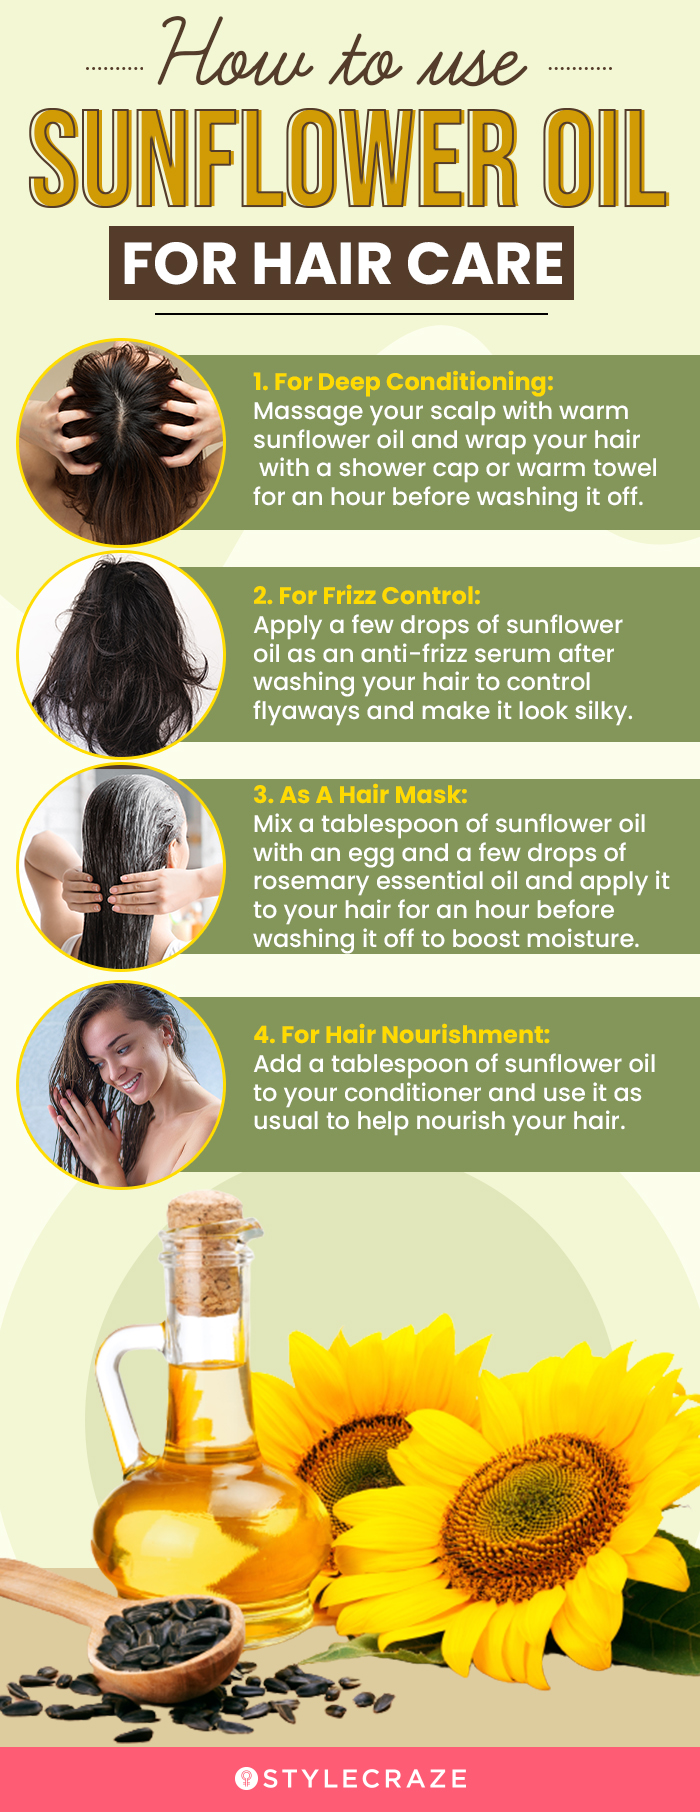 Benefit Sunflower seed oil for hair